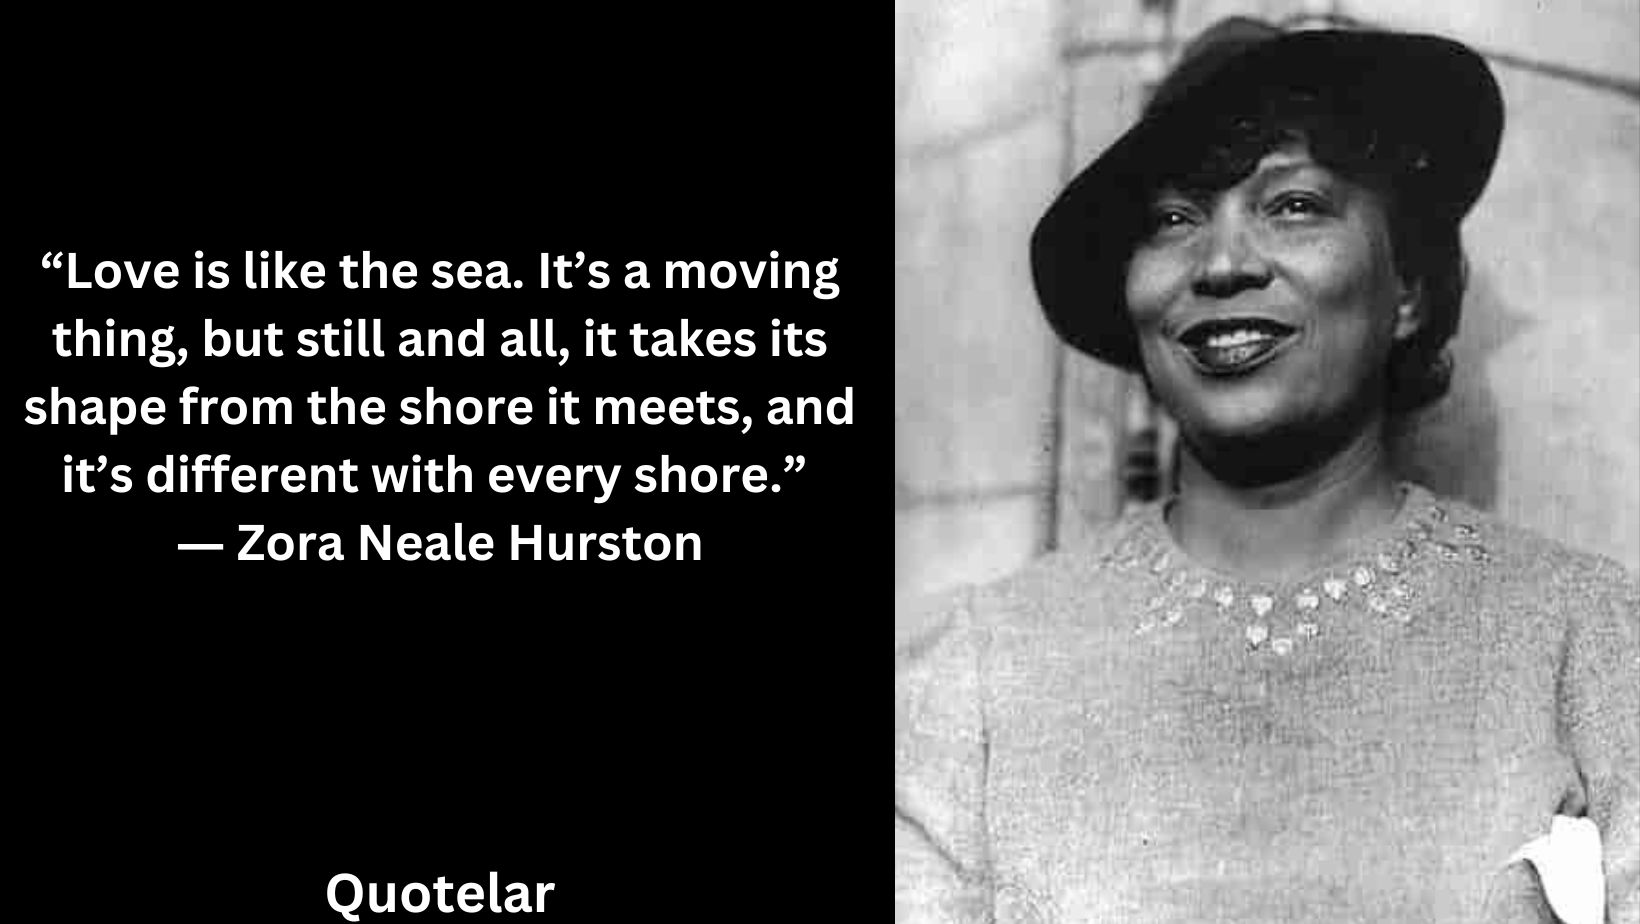 Zora Neale Hurston: The Real Deal, American Woman Writer (1891